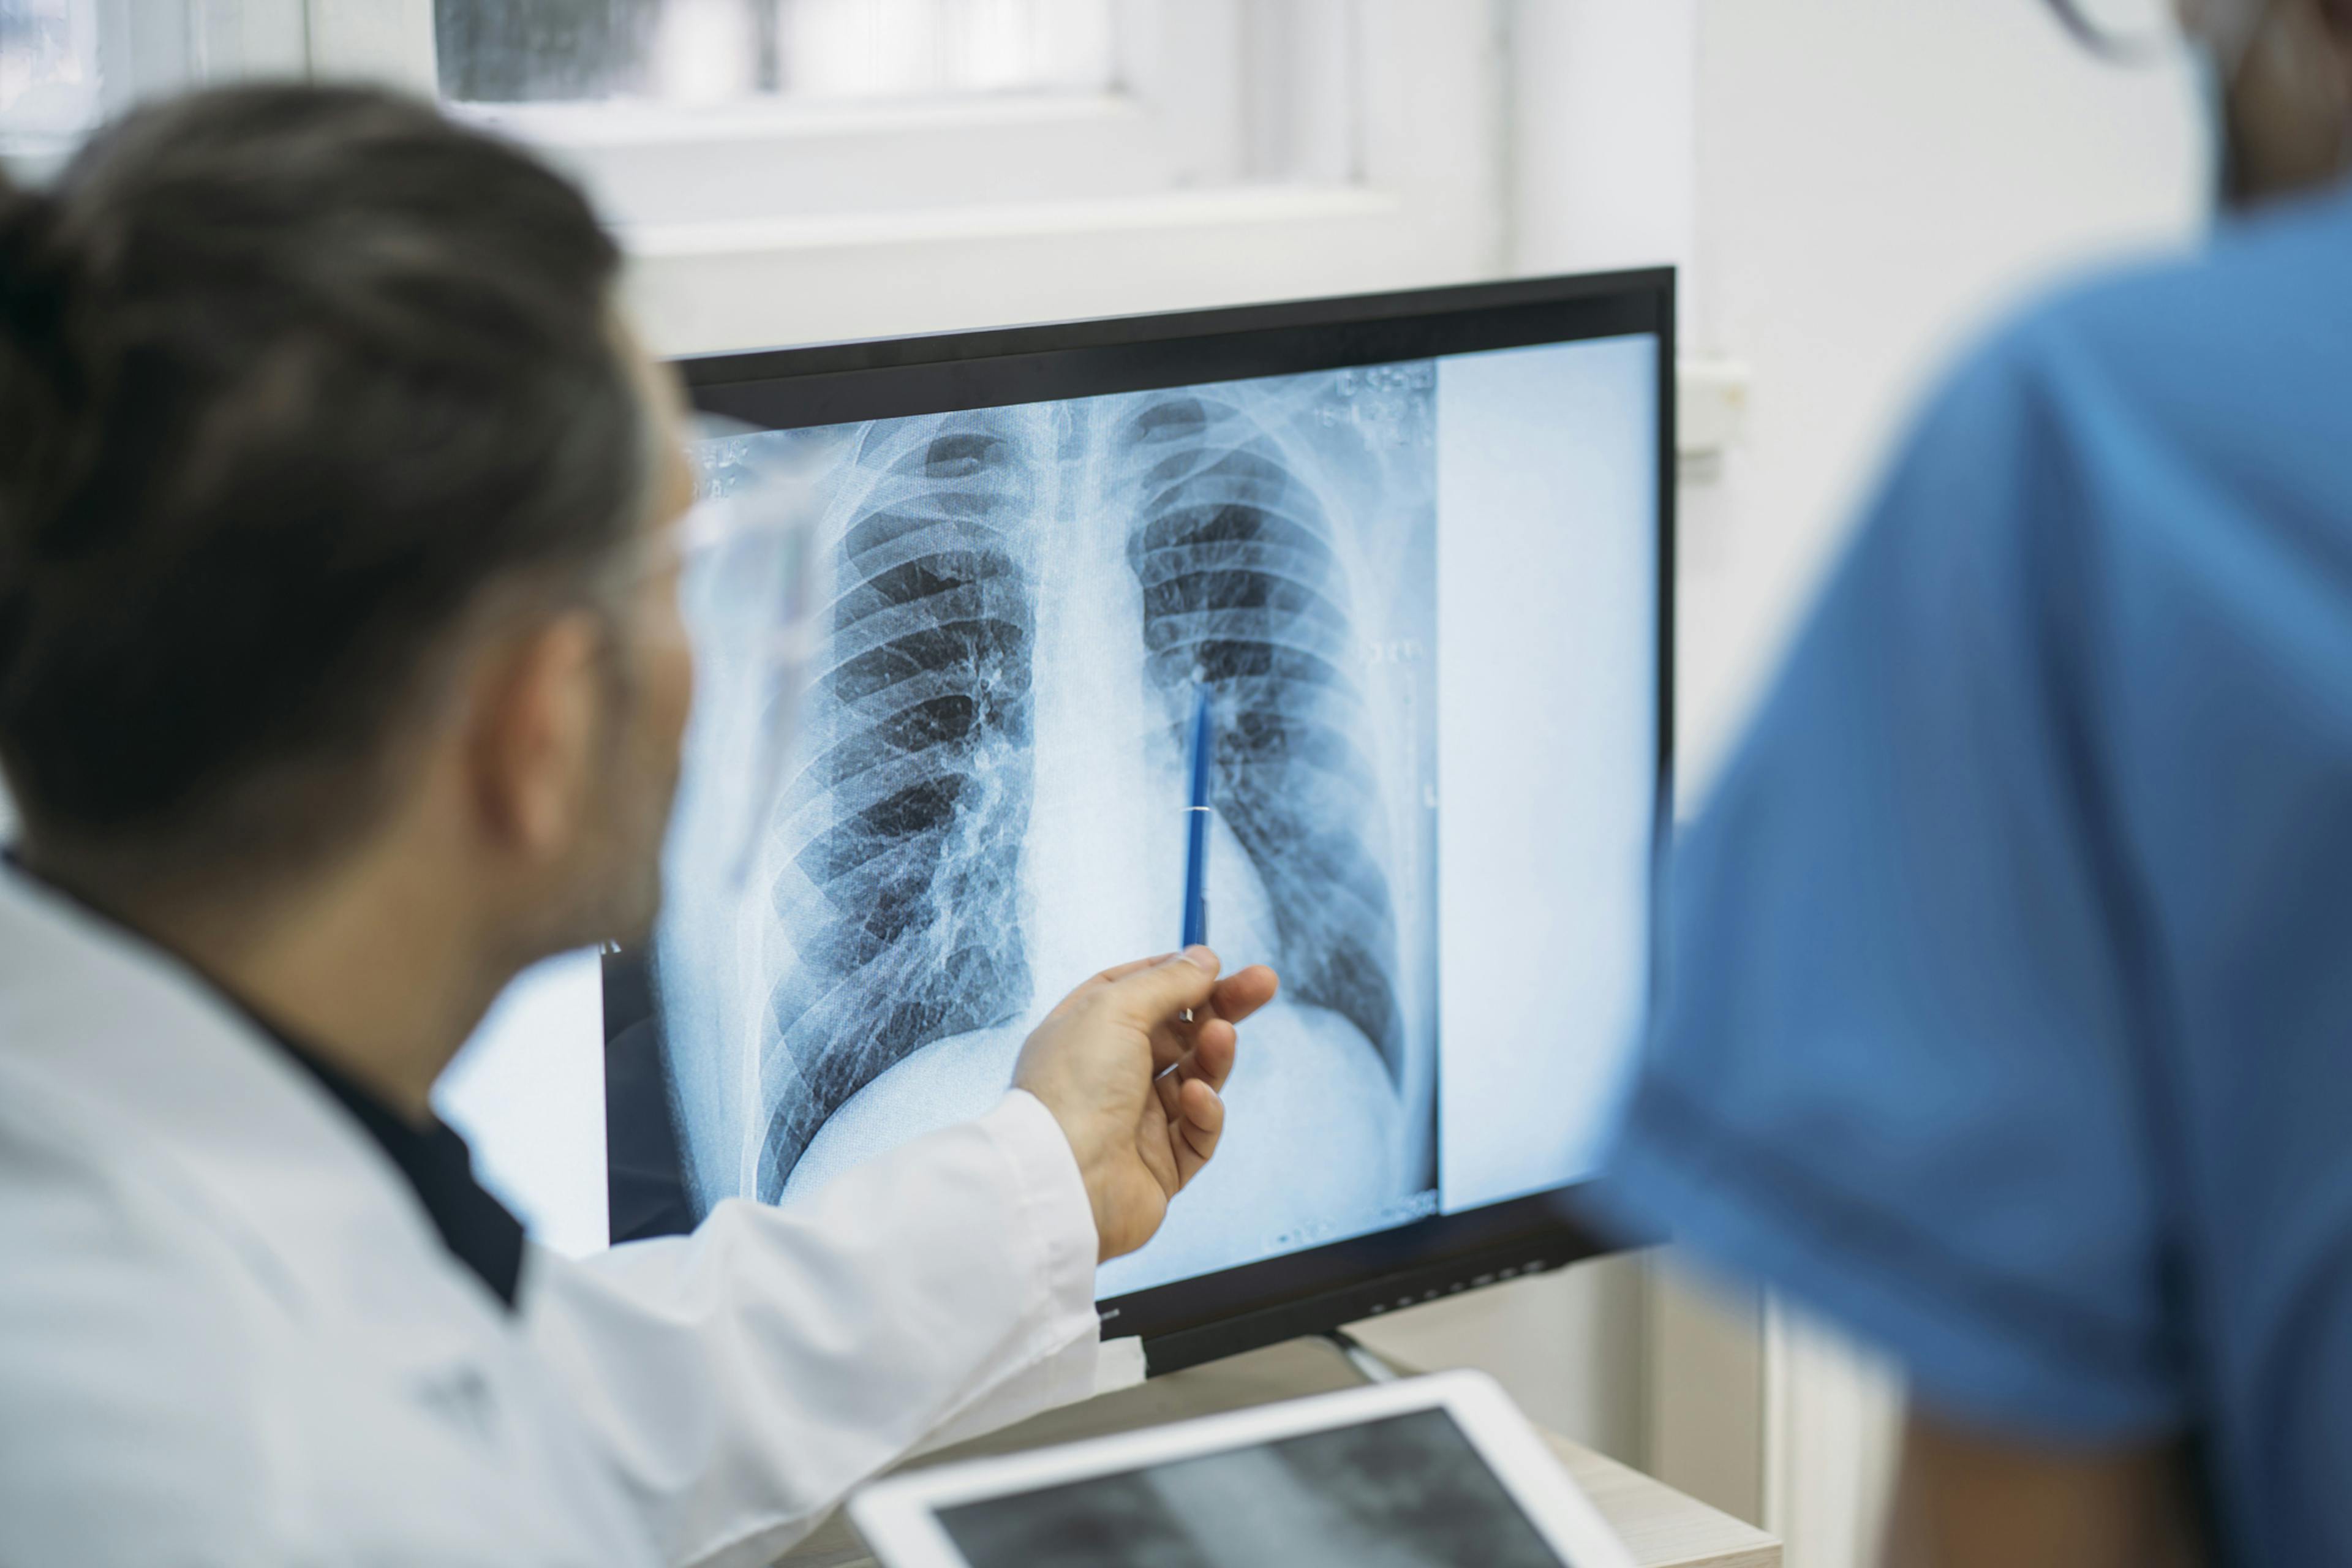 A patient's care team reviews a radiology image